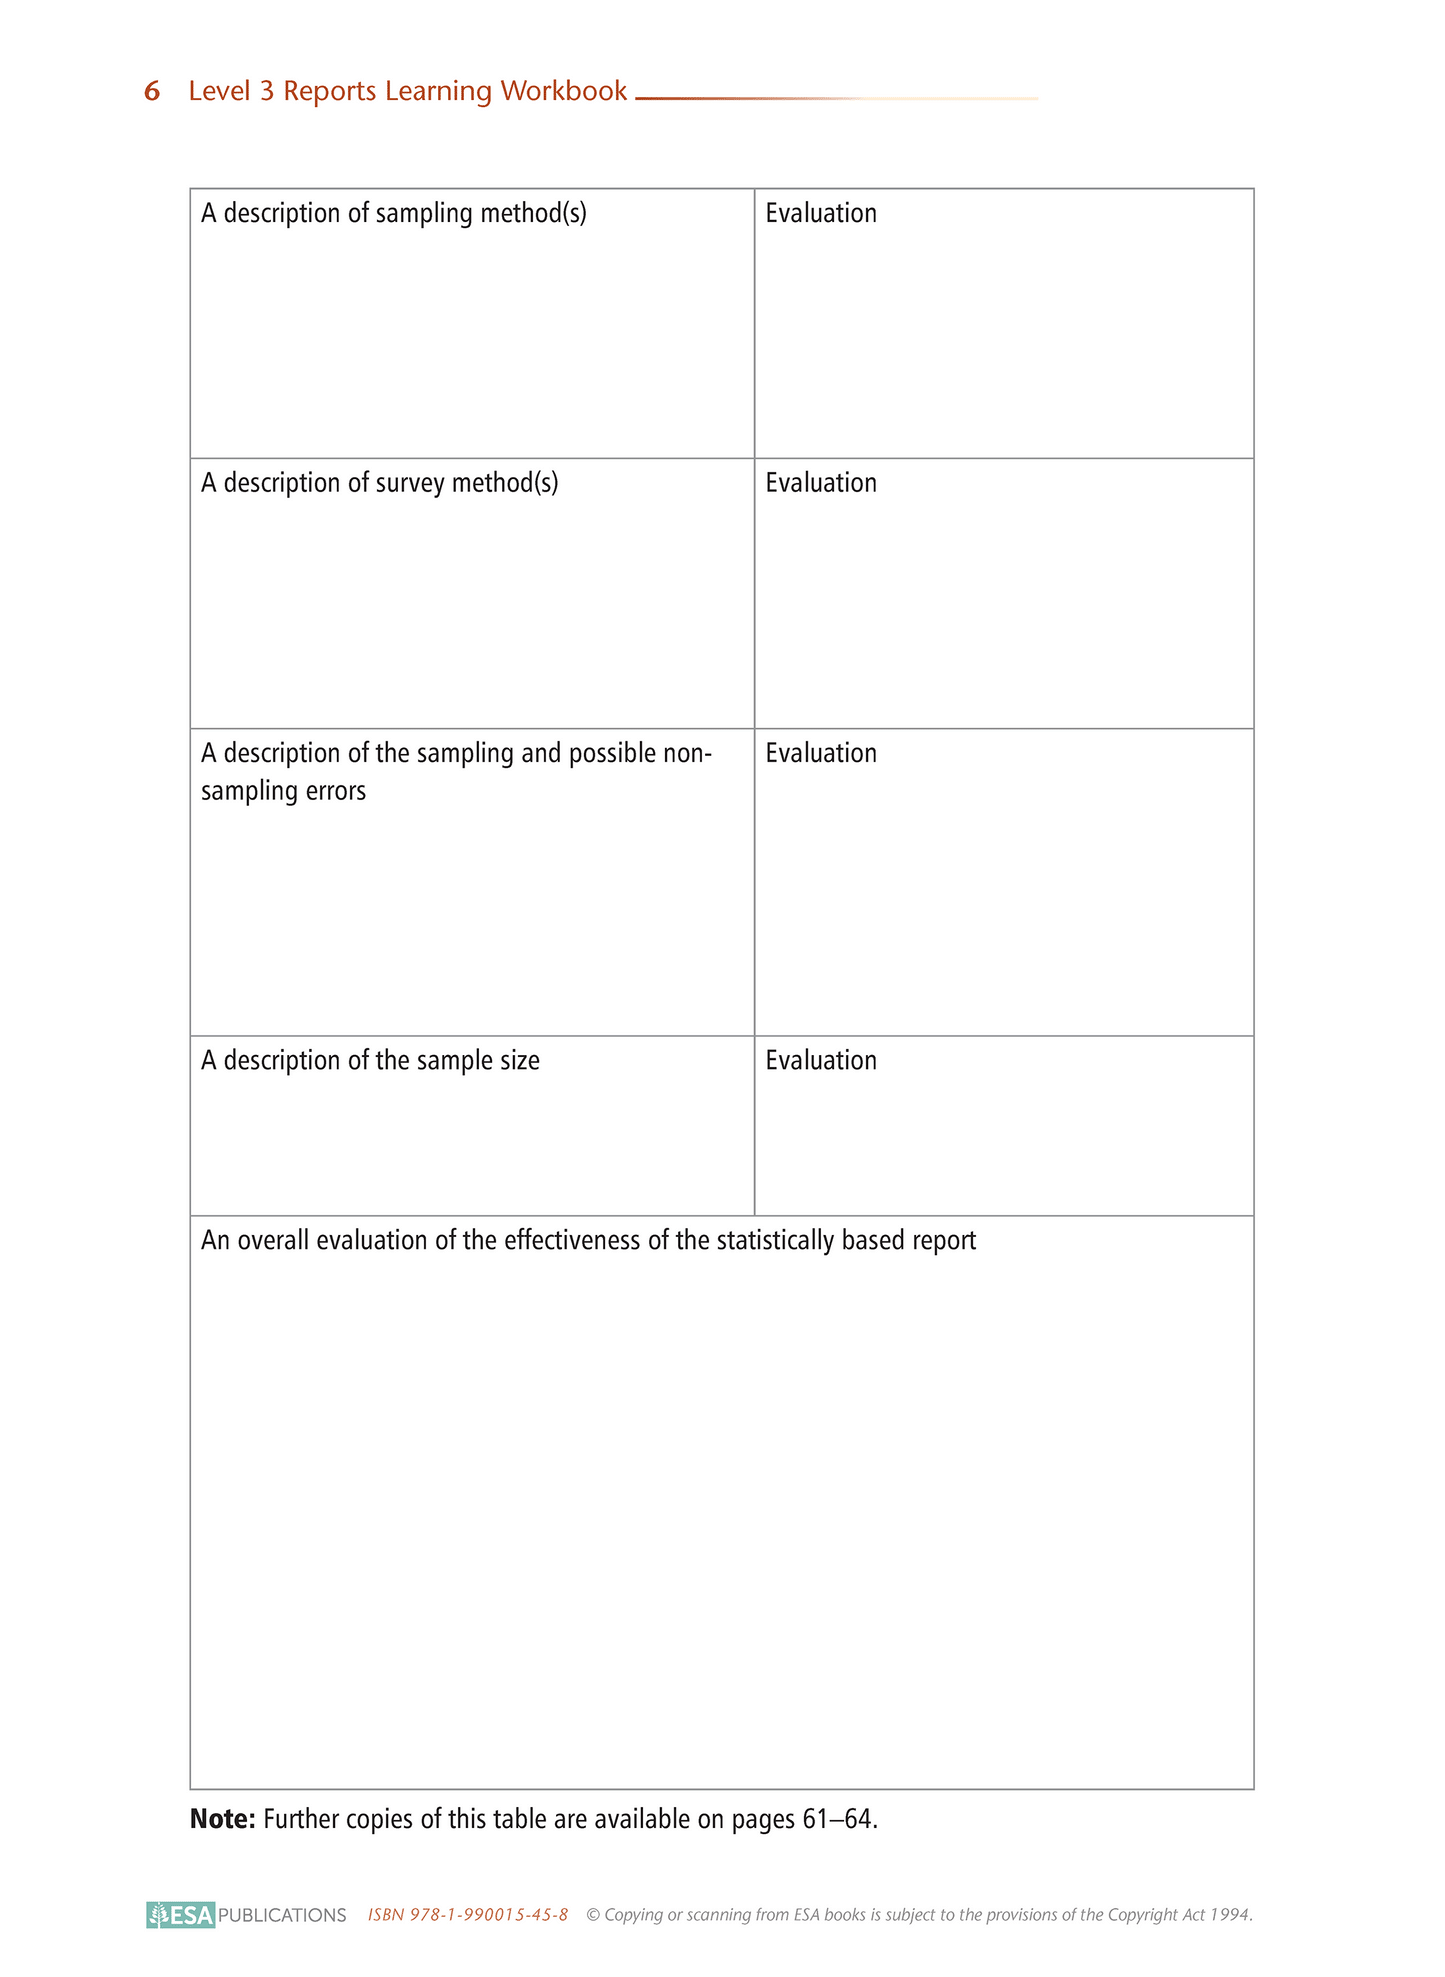 Level 3 Reports 3.12 Learning Workbook